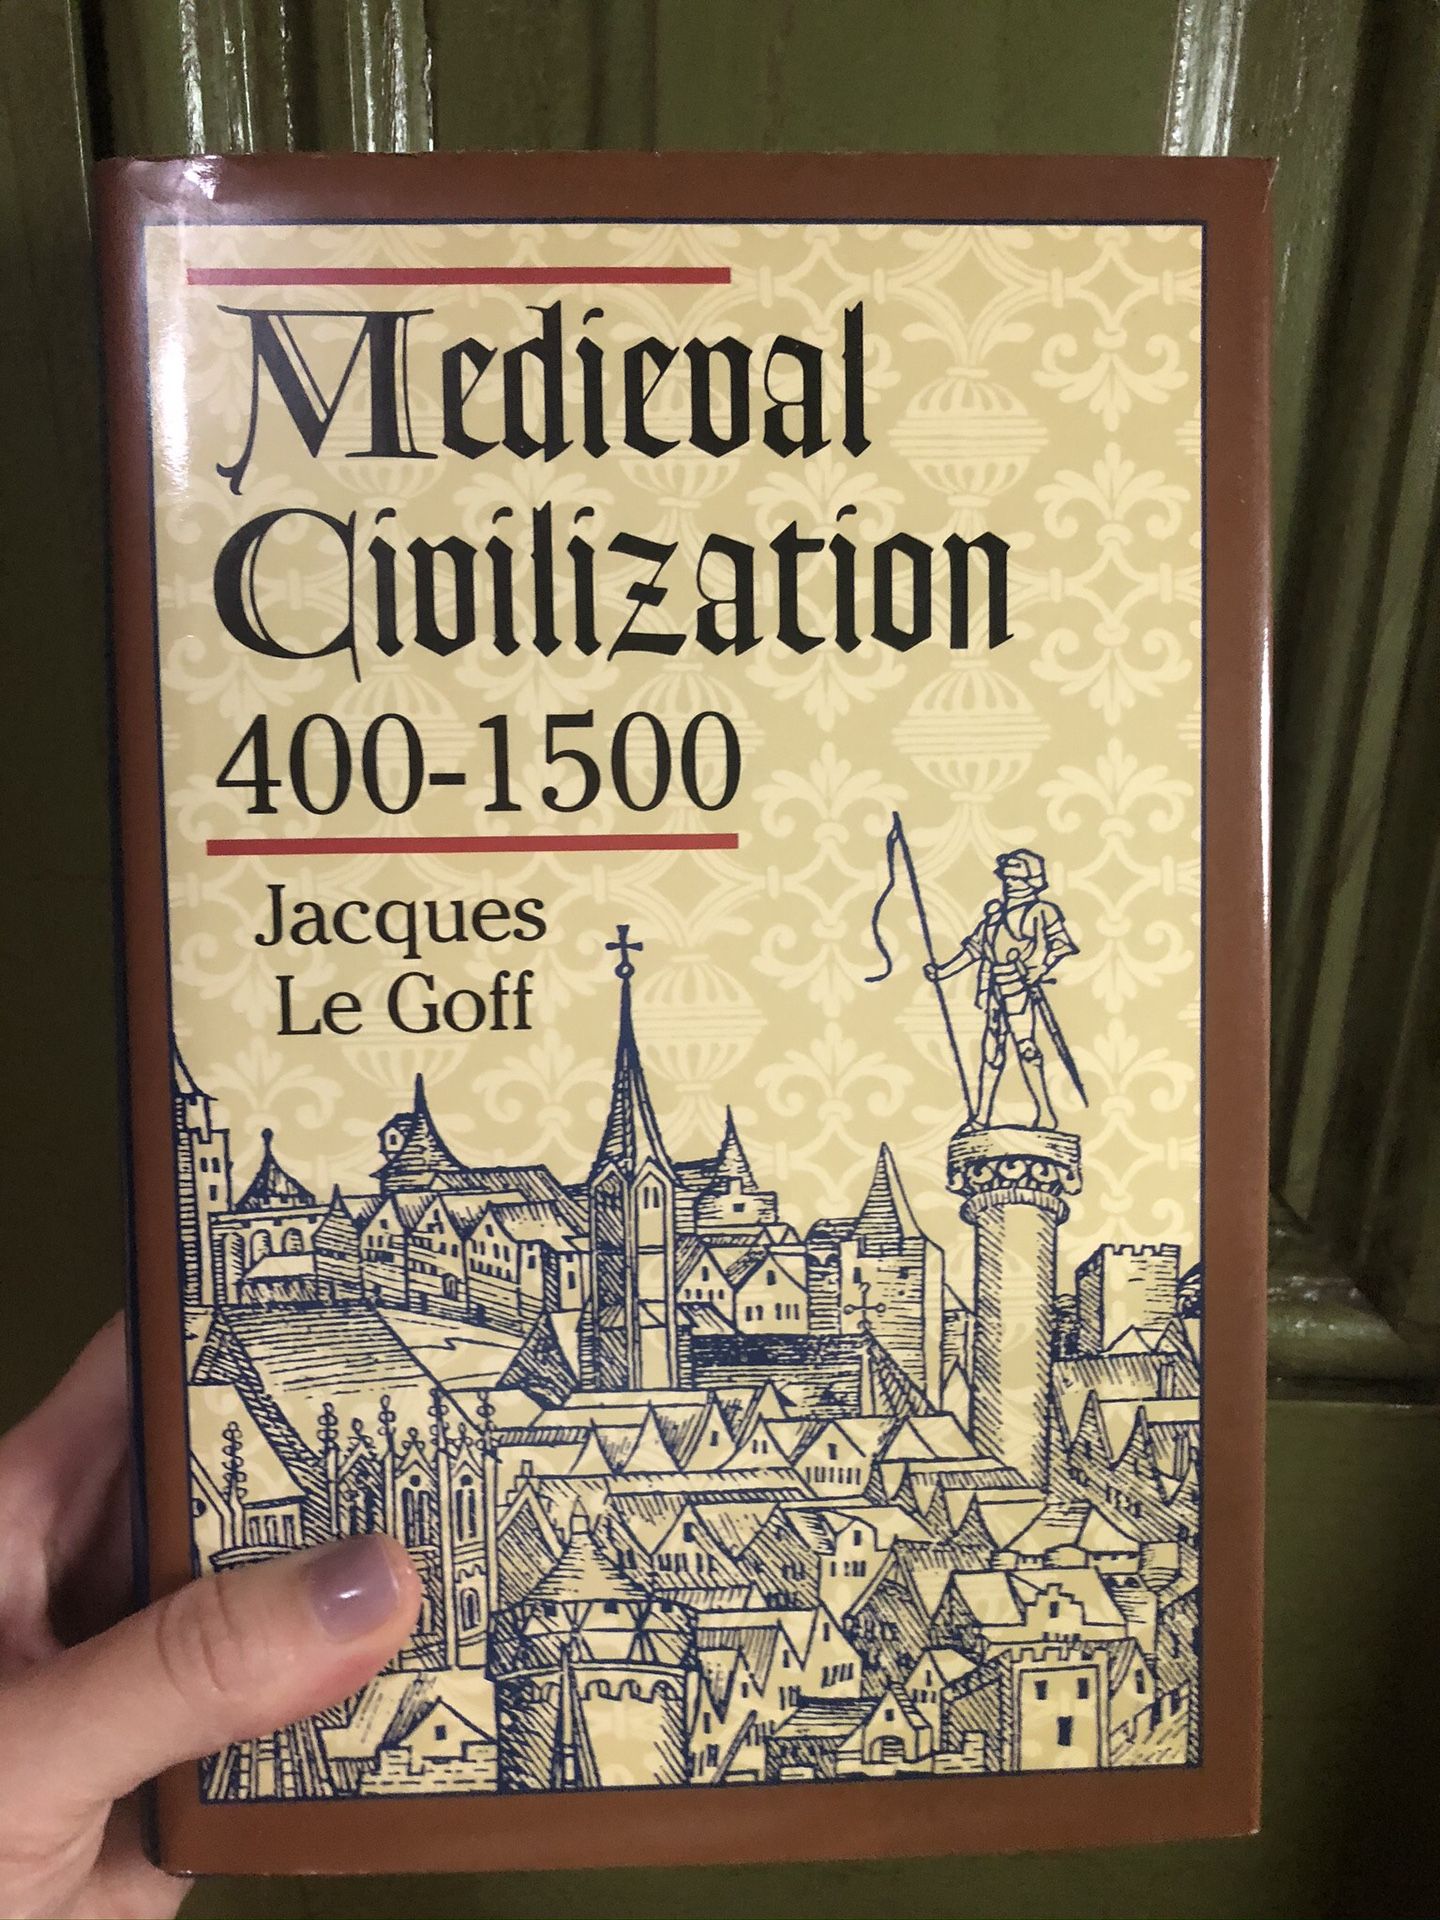 Medieval Civlilization 400 - 1500 by Jacques Le Goff (Hardcover, NEW)